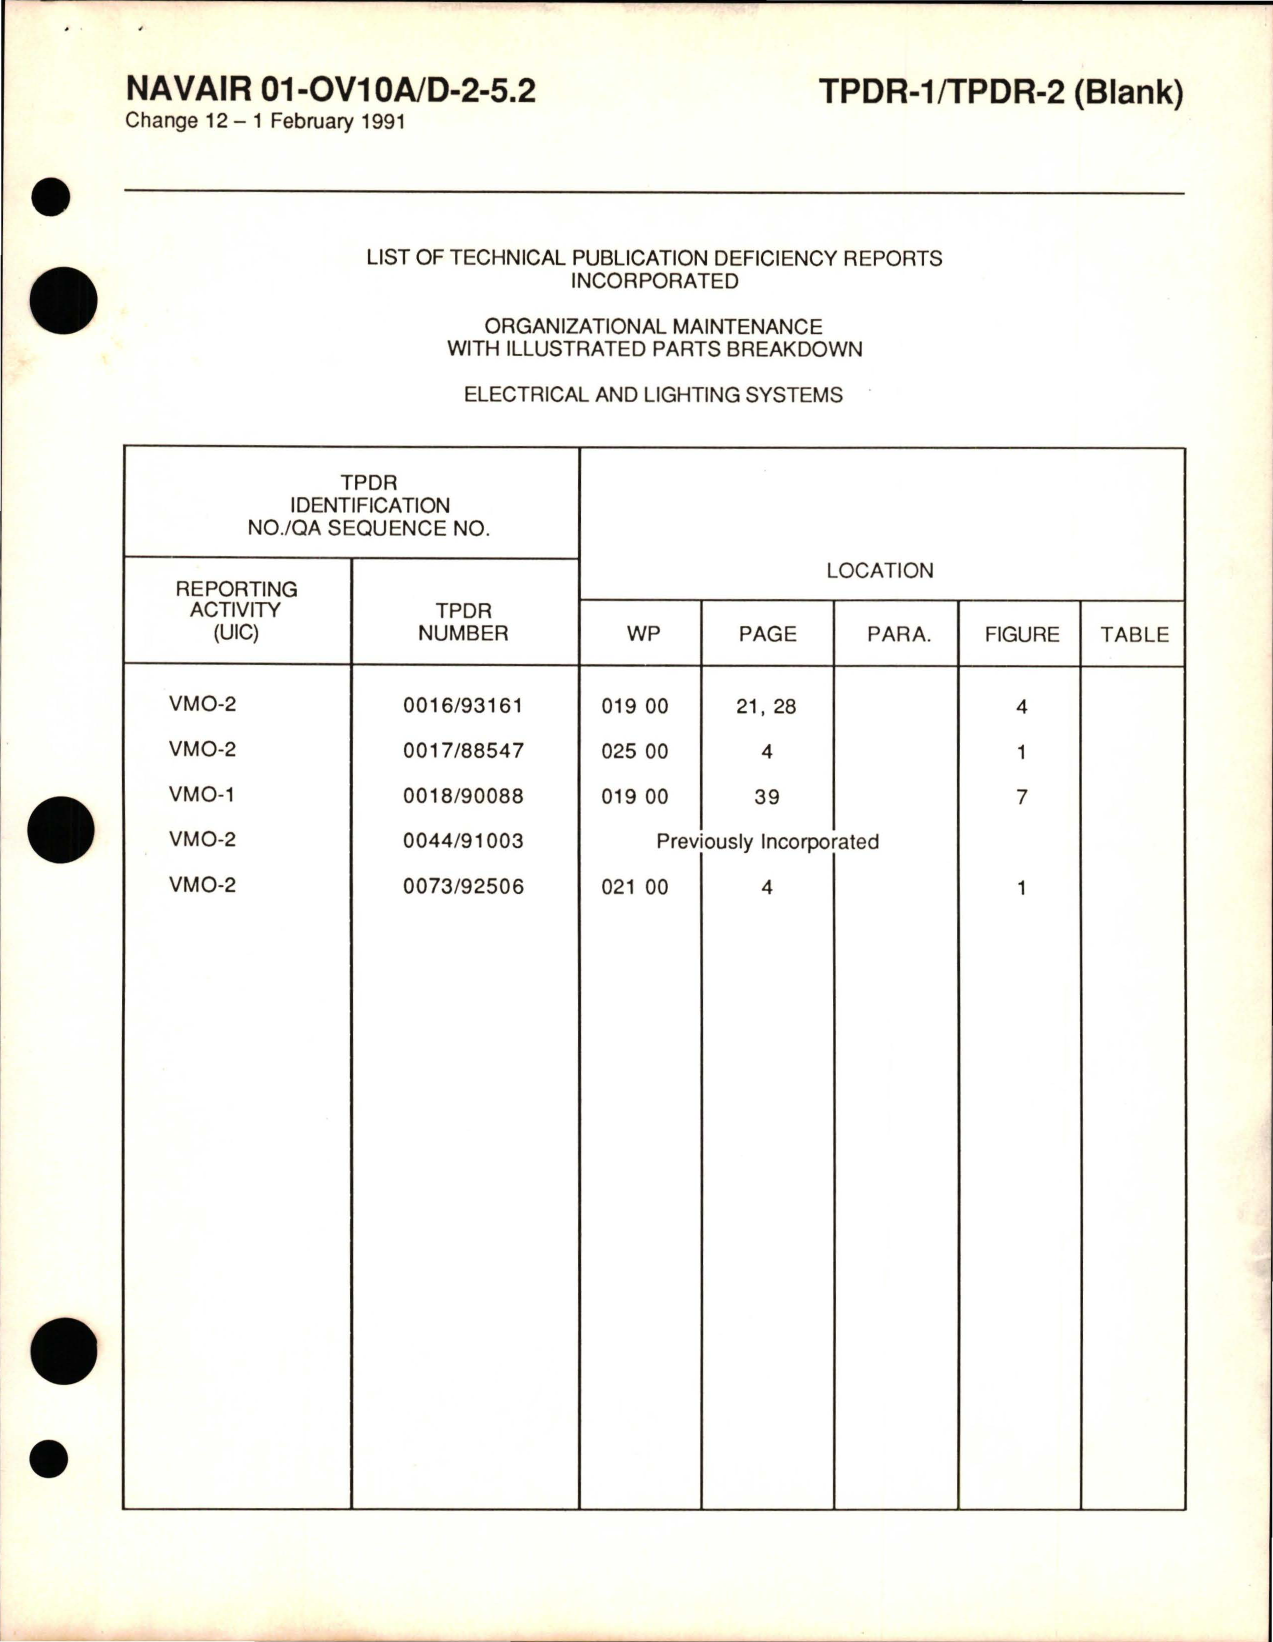 Sample page 5 from AirCorps Library document: Organizational Maintenance with Illustrated Parts Breakdown for Electrical and Lighting Systems for OV-10A/D